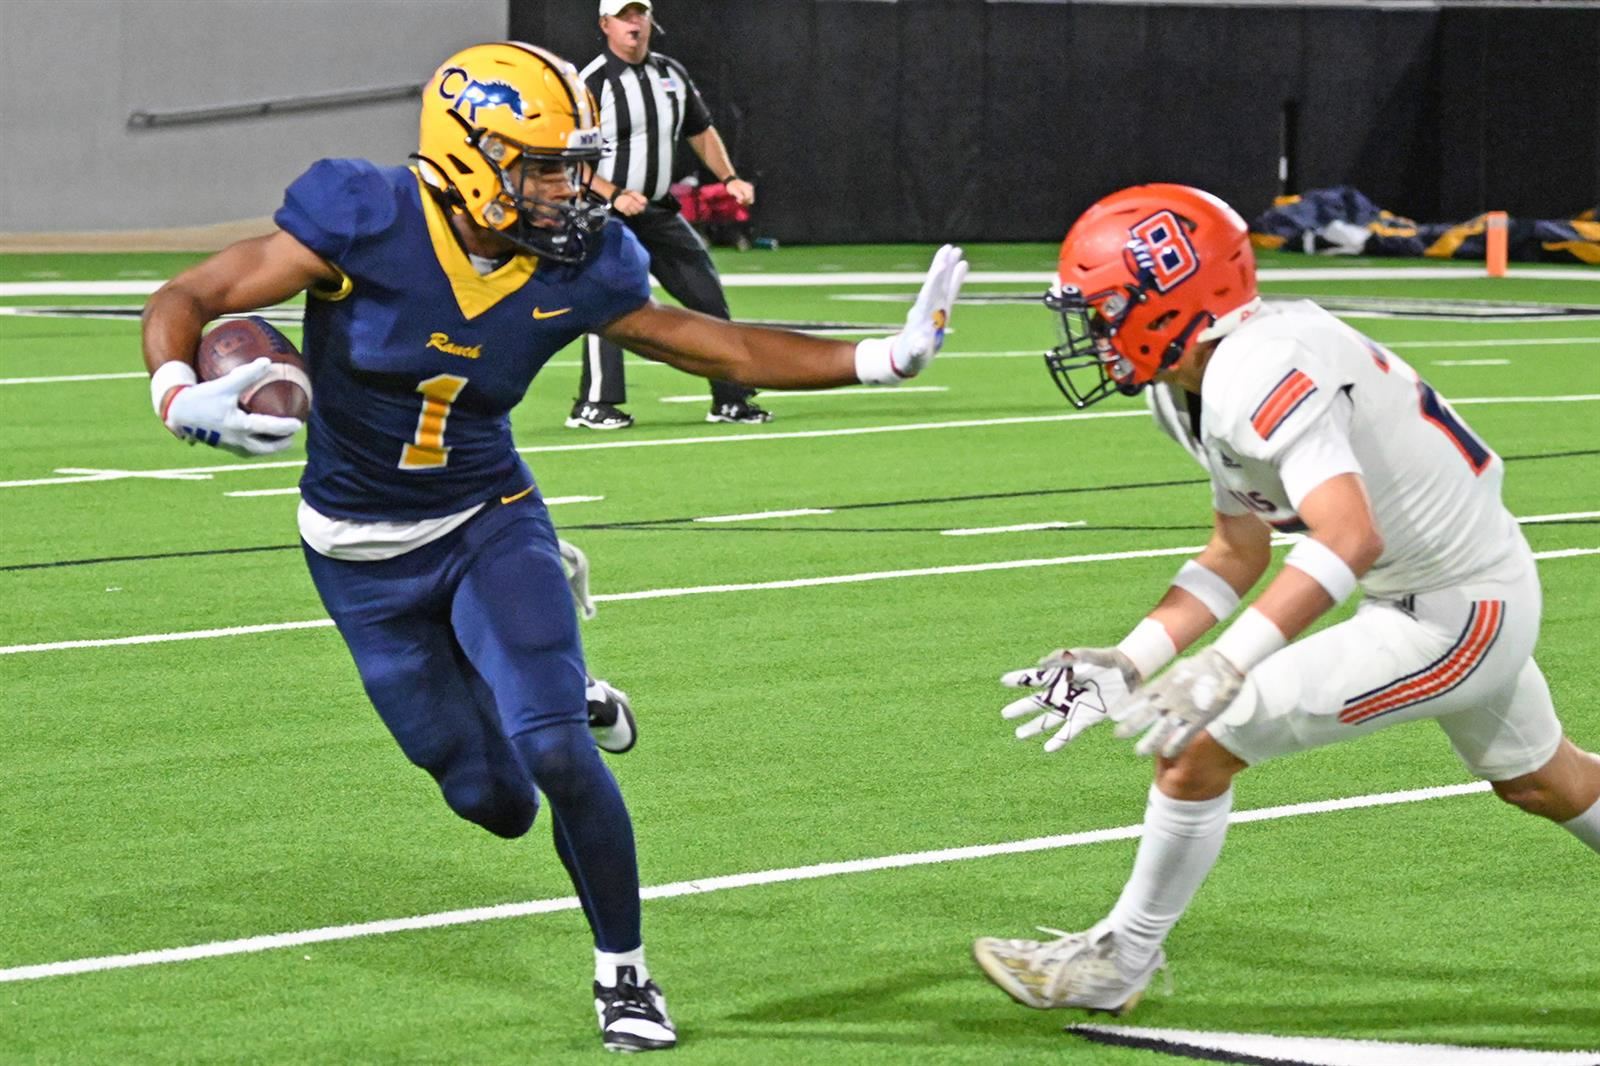 Cypress Ranch High School senior Tracy James was named to the All-District 16-6A football team.